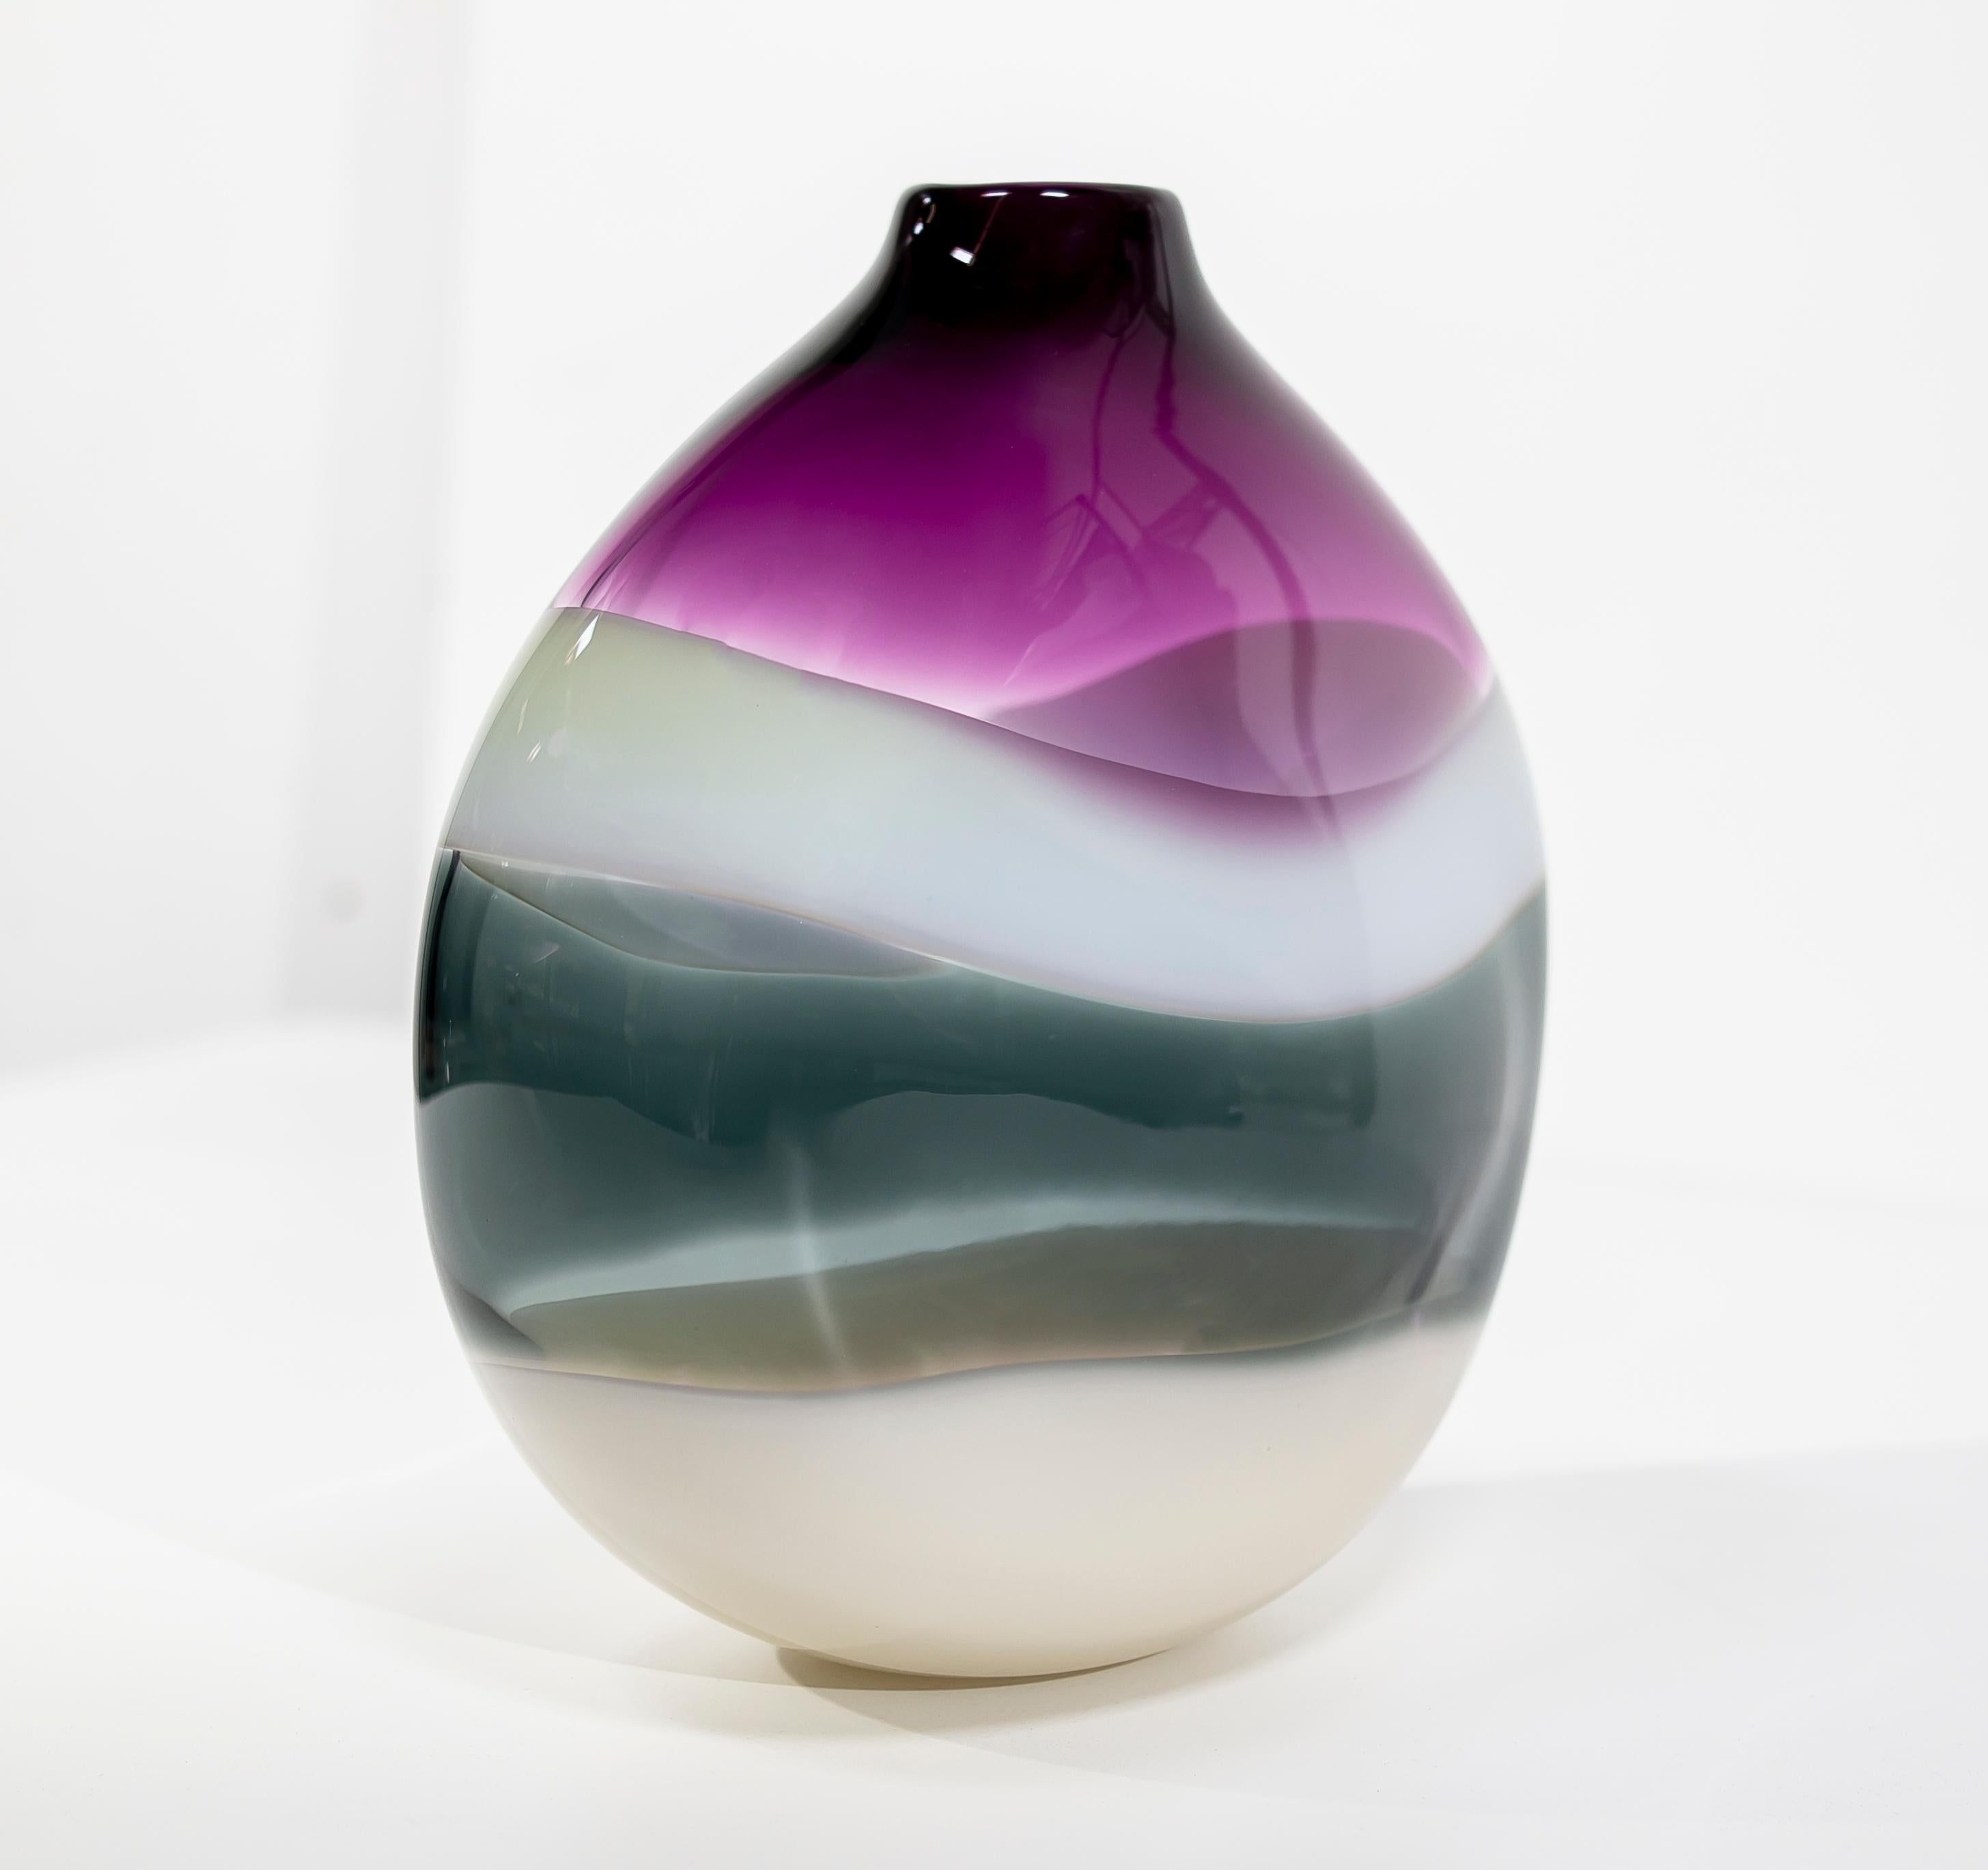 Handblown glass vase. Banded series: Inspired by the rich hues and topography of Southern California, alternating layers of opaque and transparent colors are applied to clear glass. New colors are formed by overlaps, adding depth to the pieces.